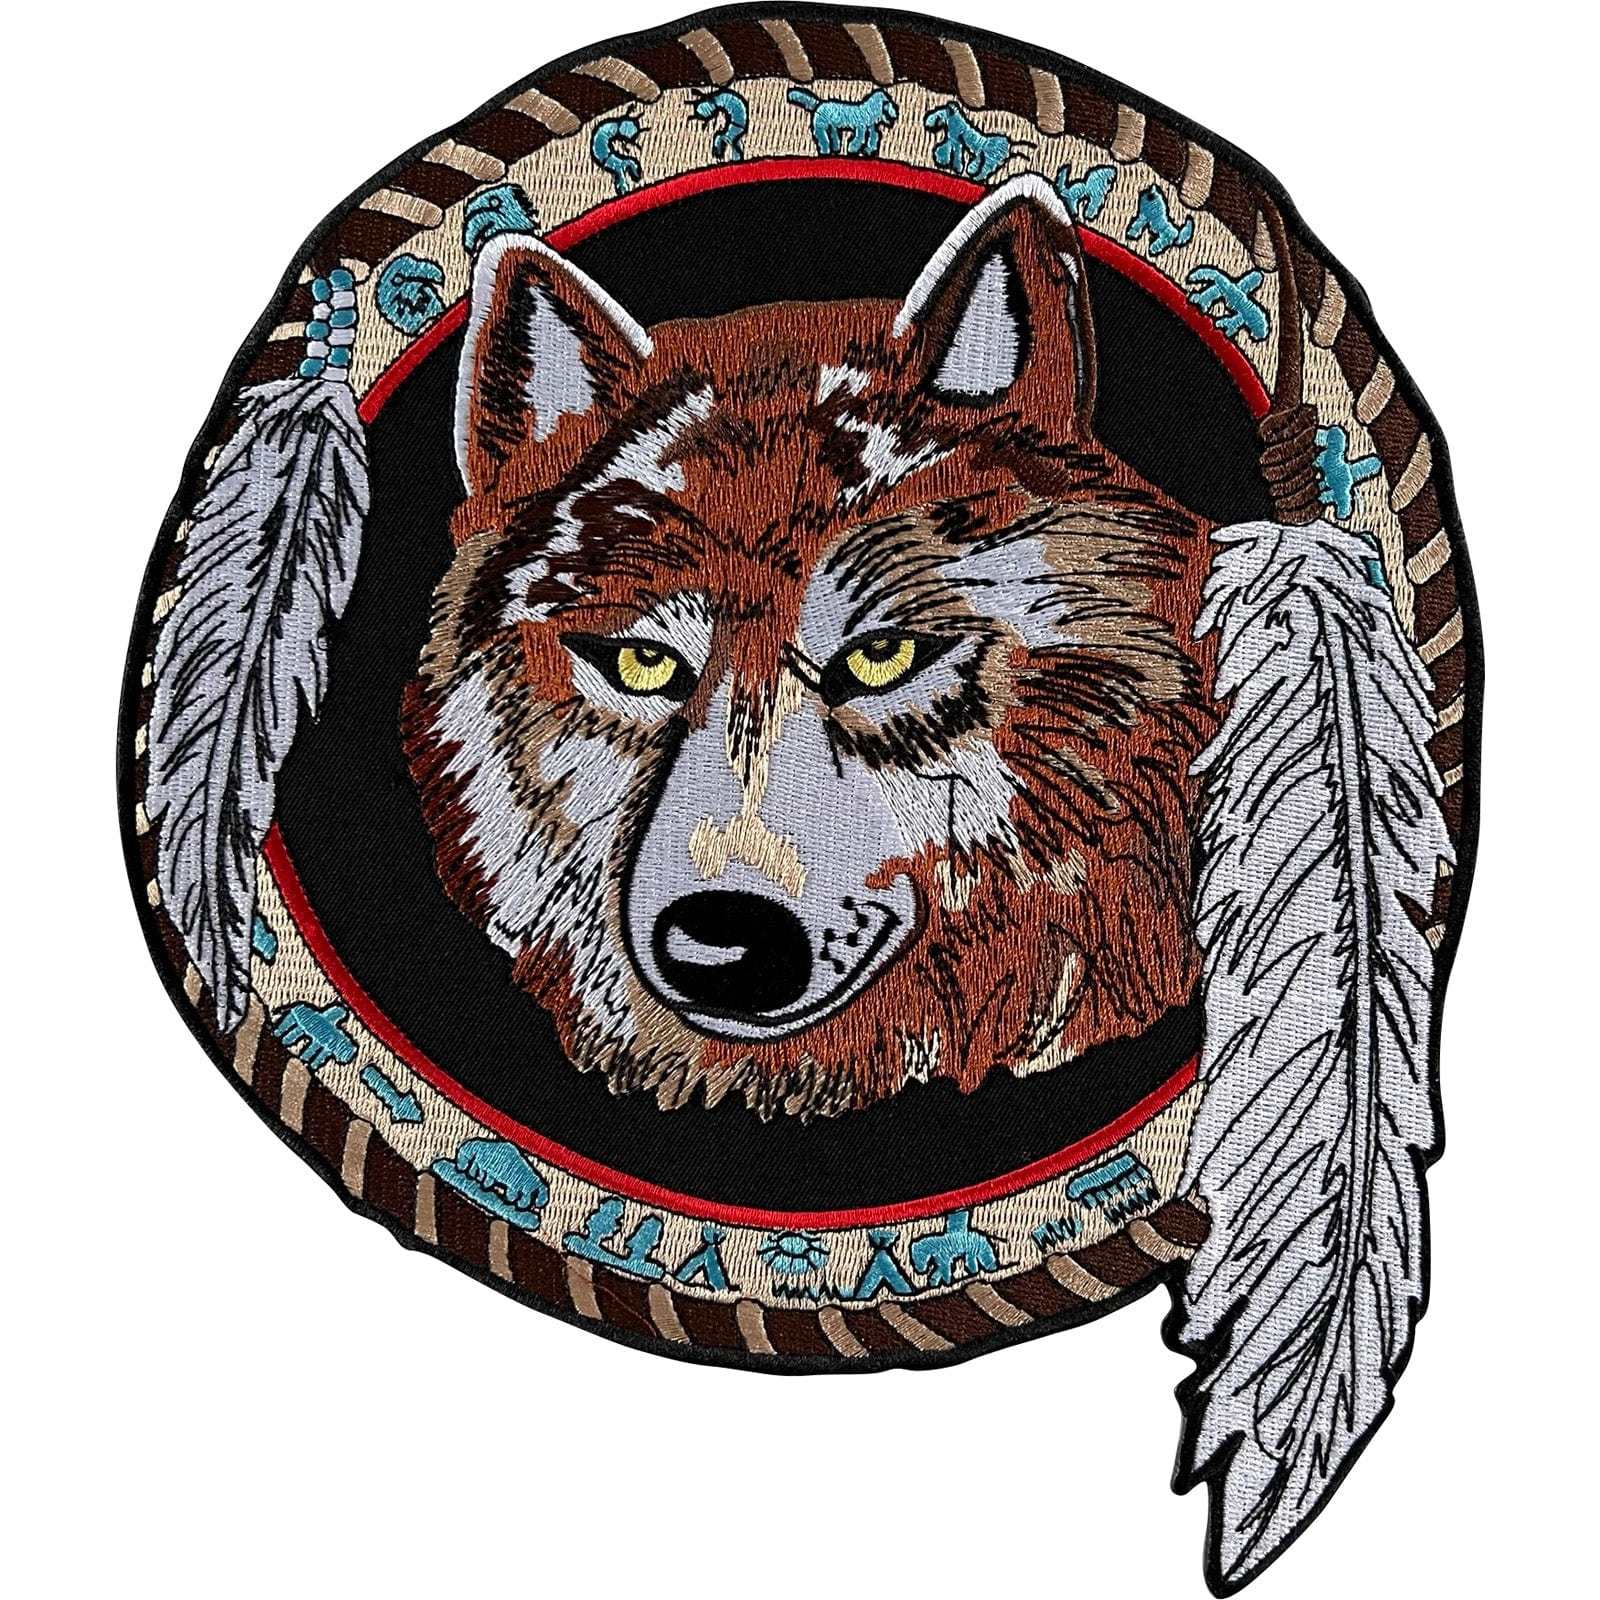 Big Large American Indian Feather Wolf Patch Iron On Sew On Embroidery Applique